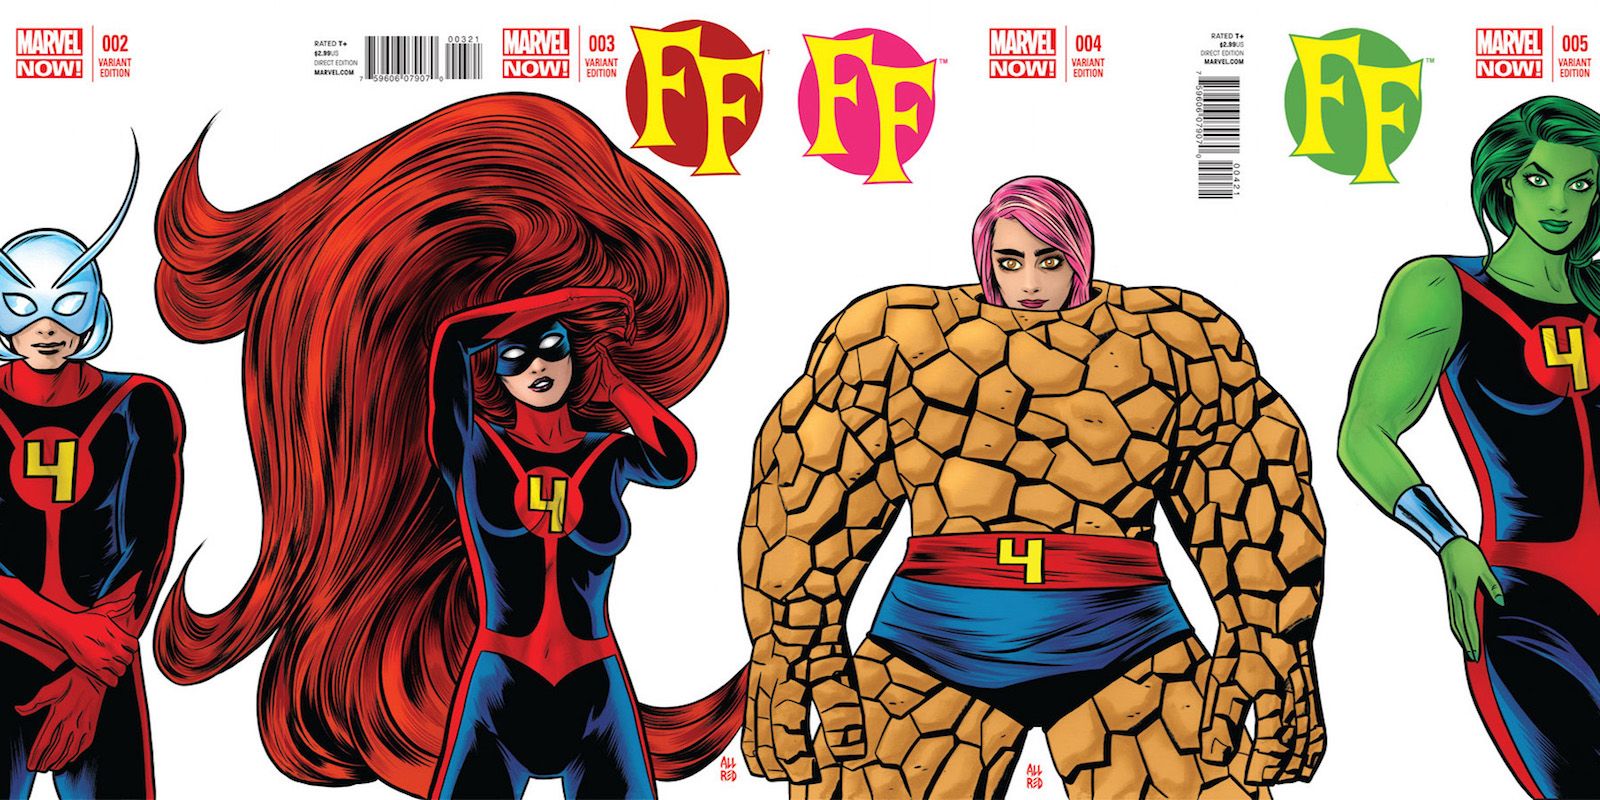 Split image of variant covers of FF comic book series.